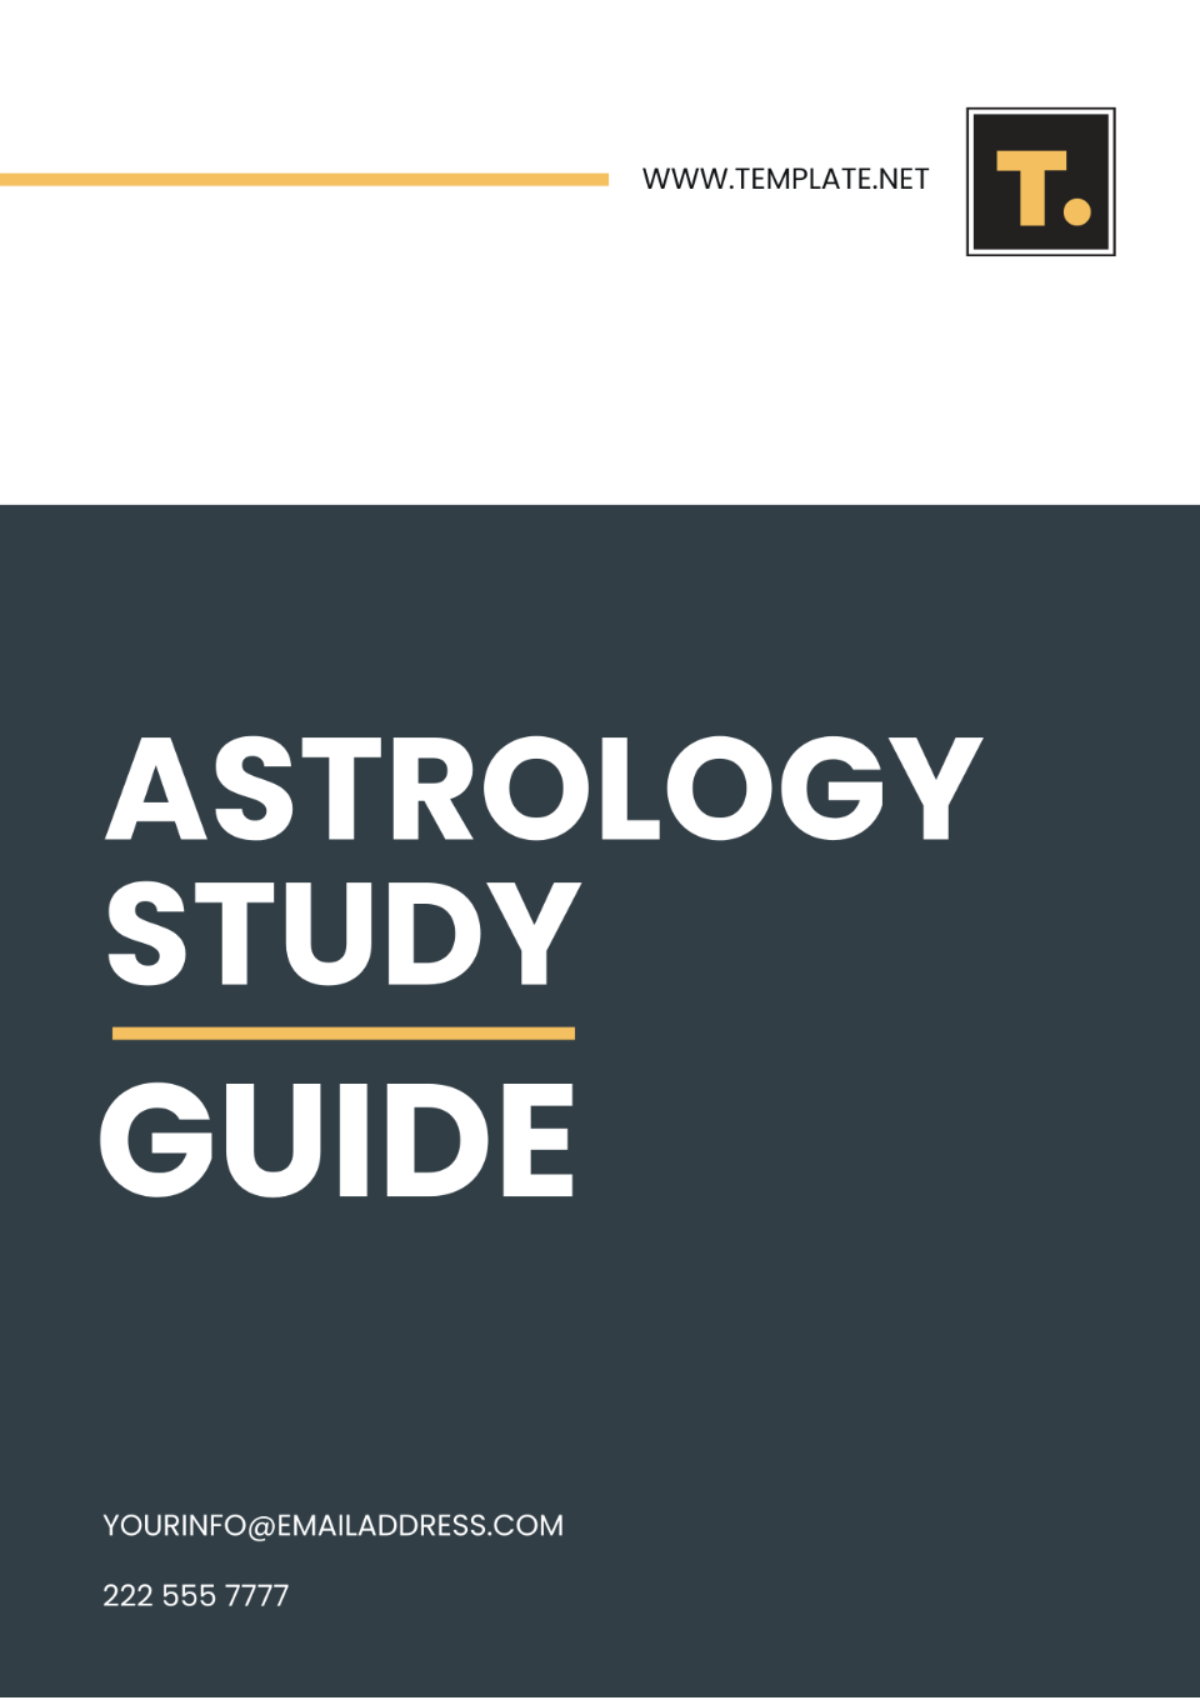 Free Astrology Study Guide Template